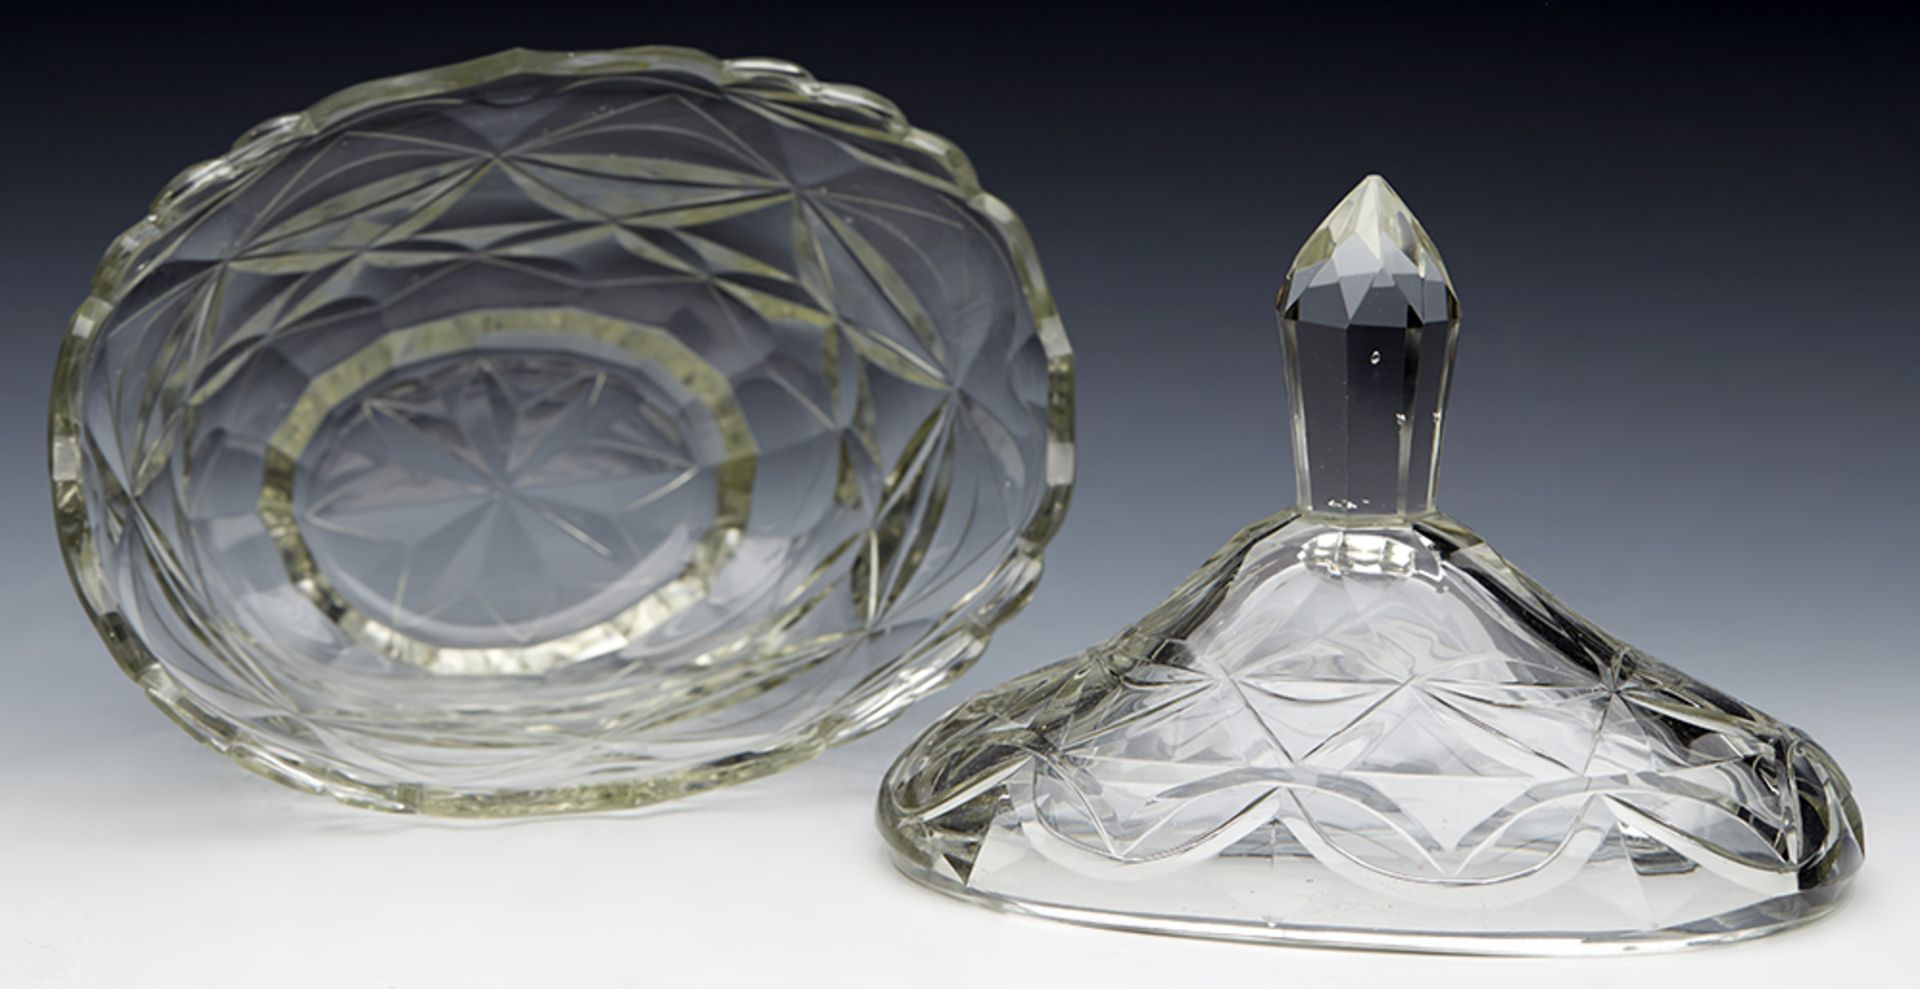 Antique Cut Glass Lidded Butter Dish And Stand Early 19Th C. - Image 8 of 15